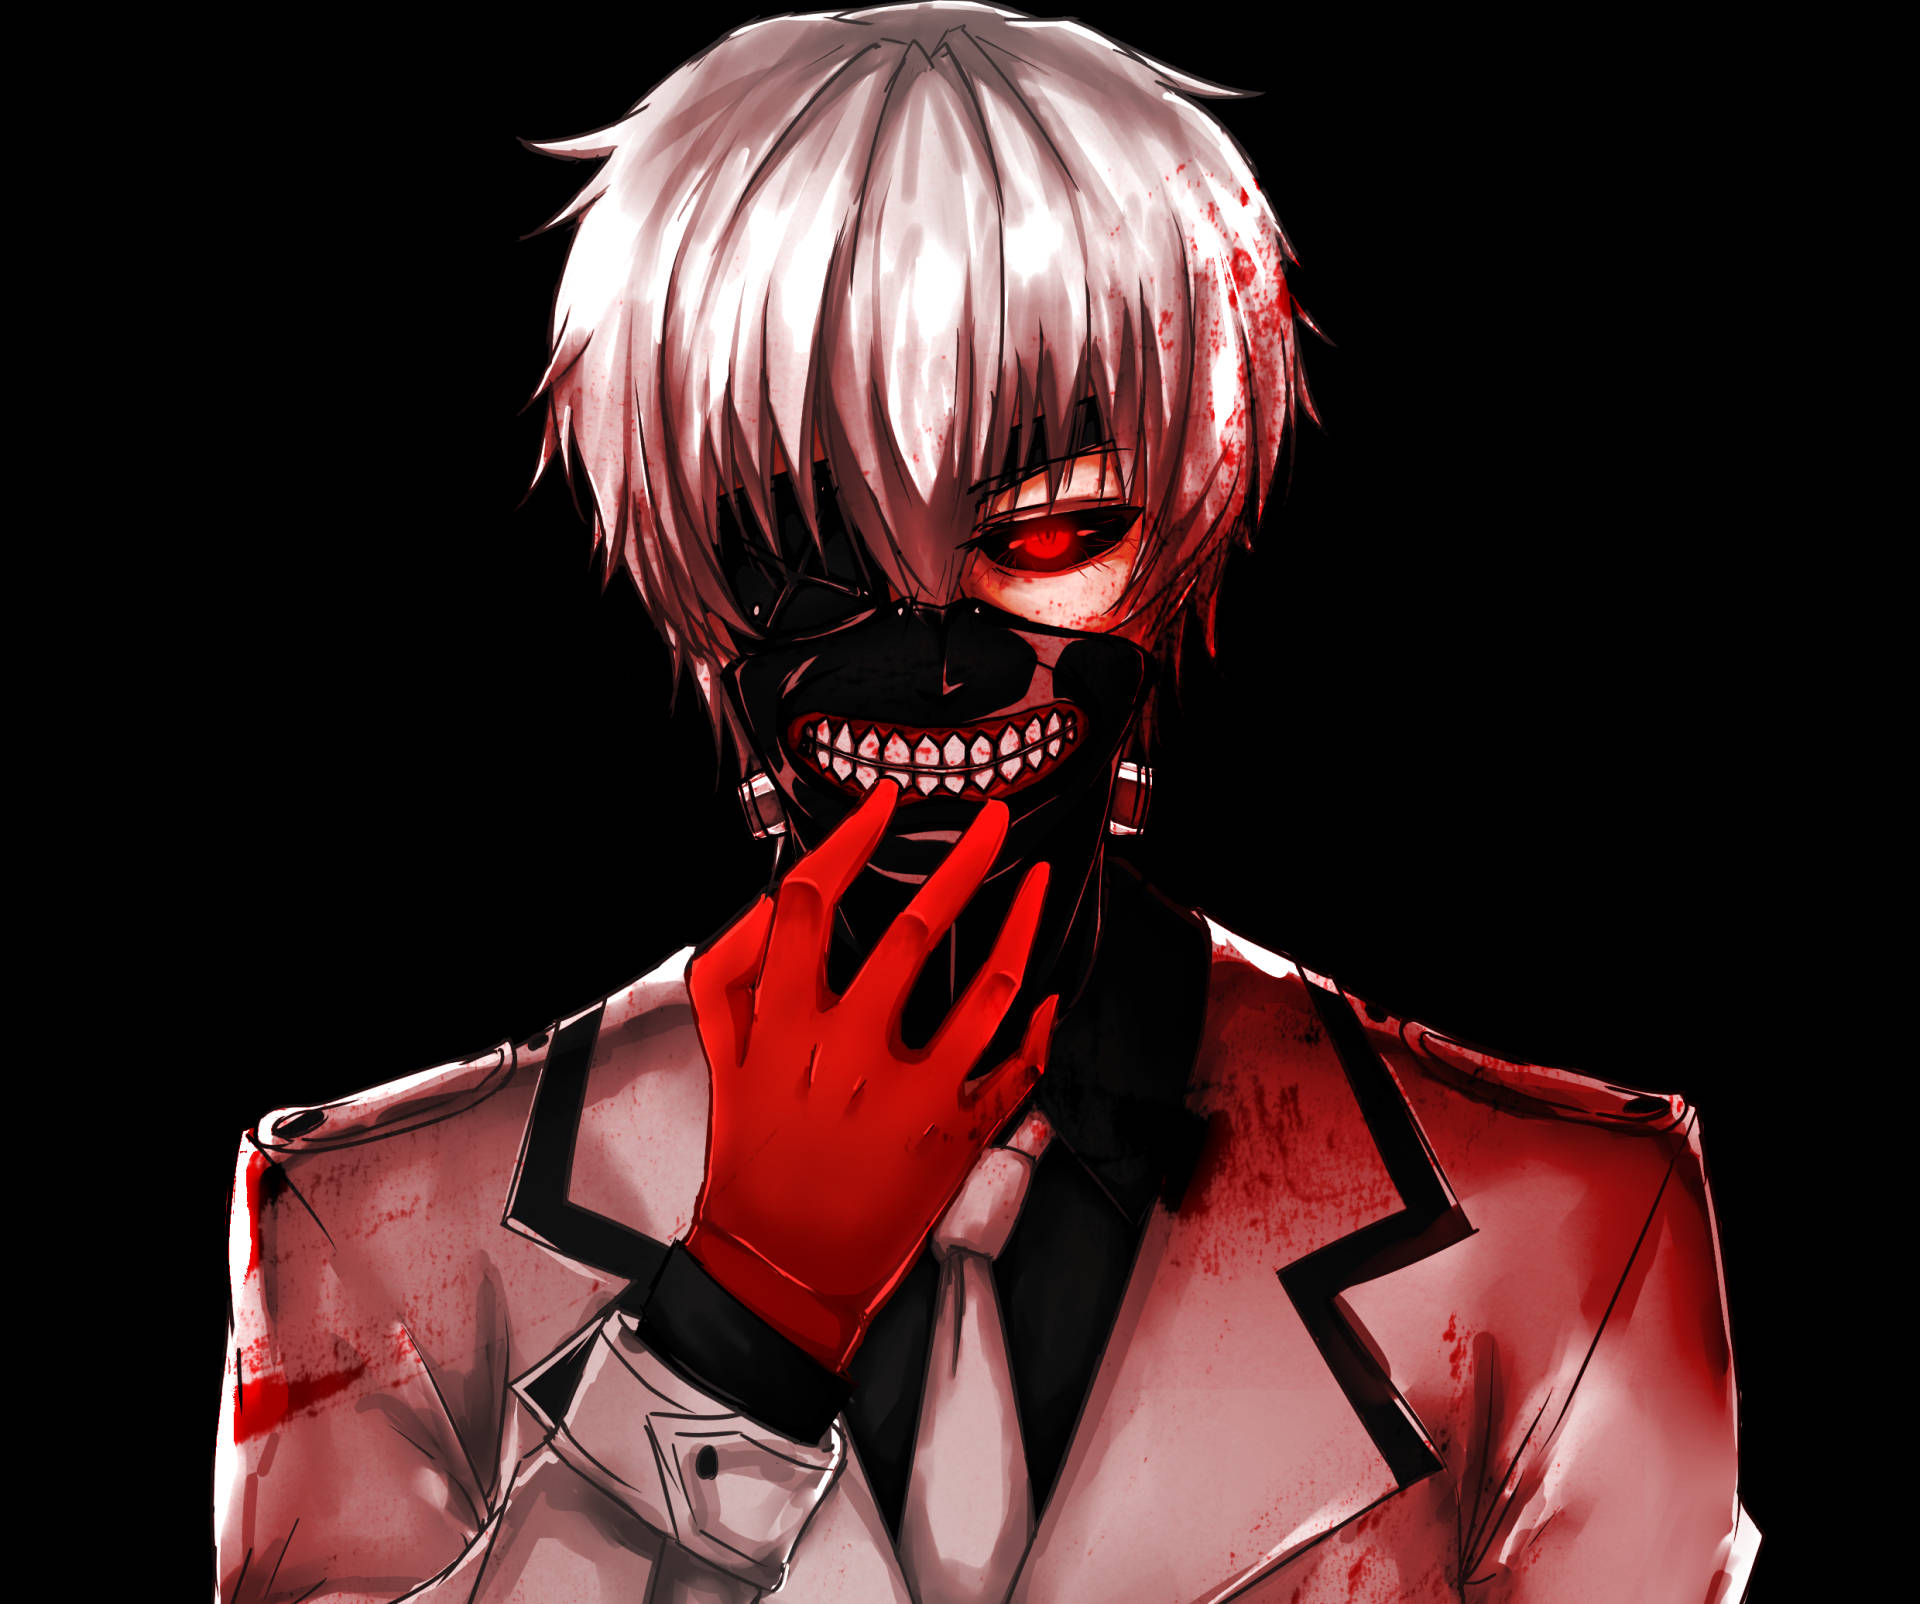 Amazon.com: makeuseof Kaneki Ken-Tokyo Ghoul Anime Poster Art Wall Pictures  for Living Room Canvas fabric cloth Print: Posters & Prints